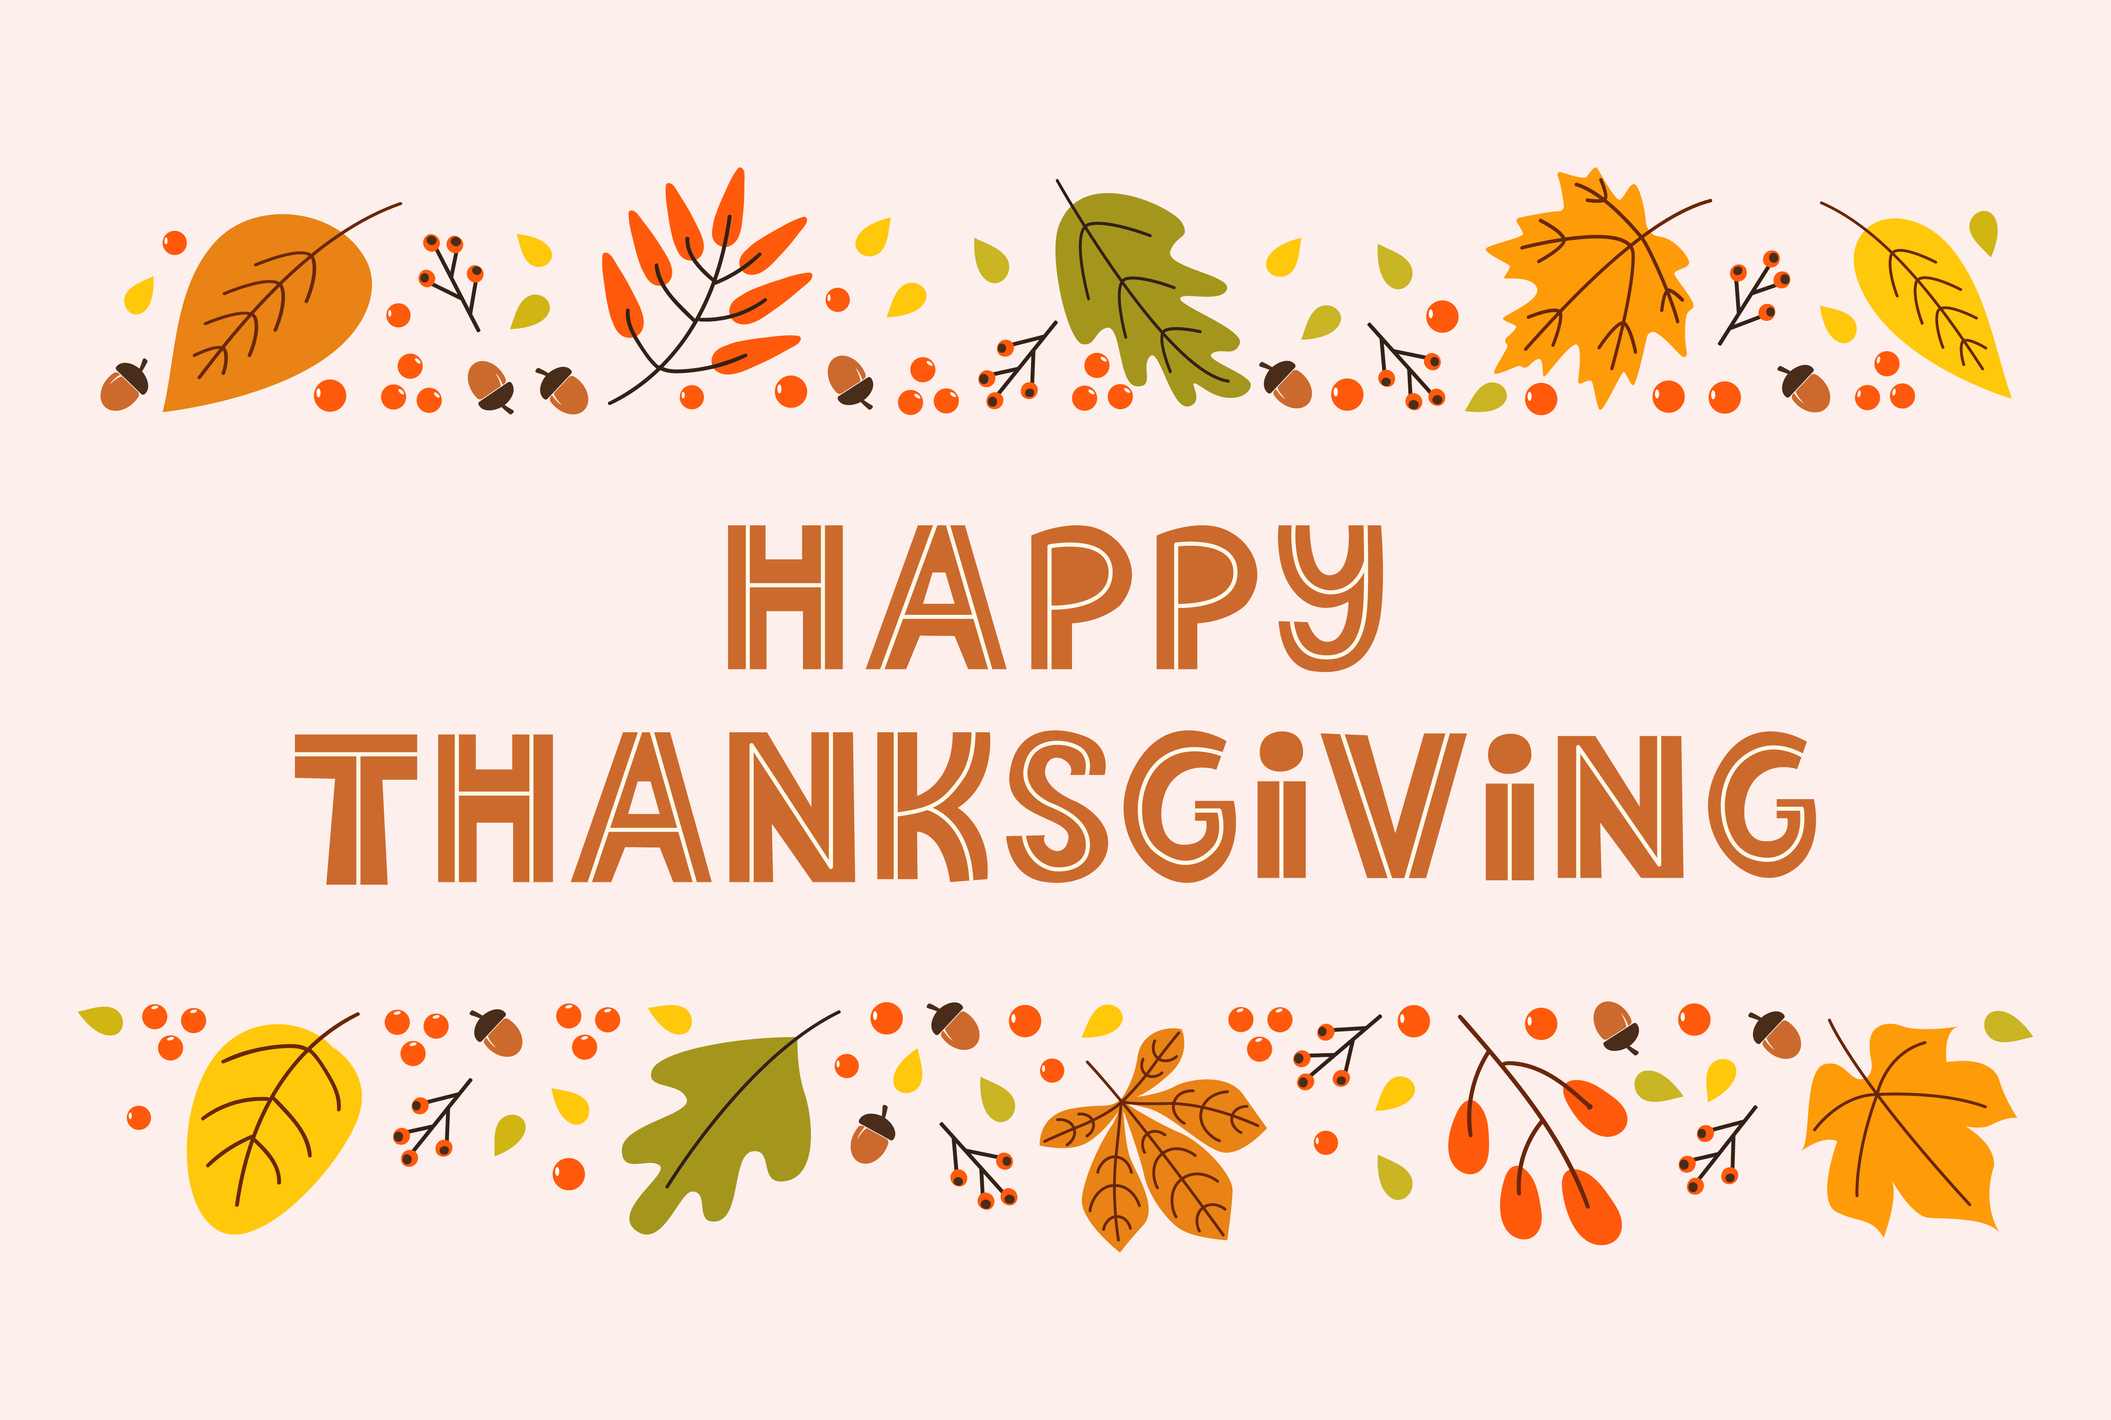 Happy Thanksgiving from ATI